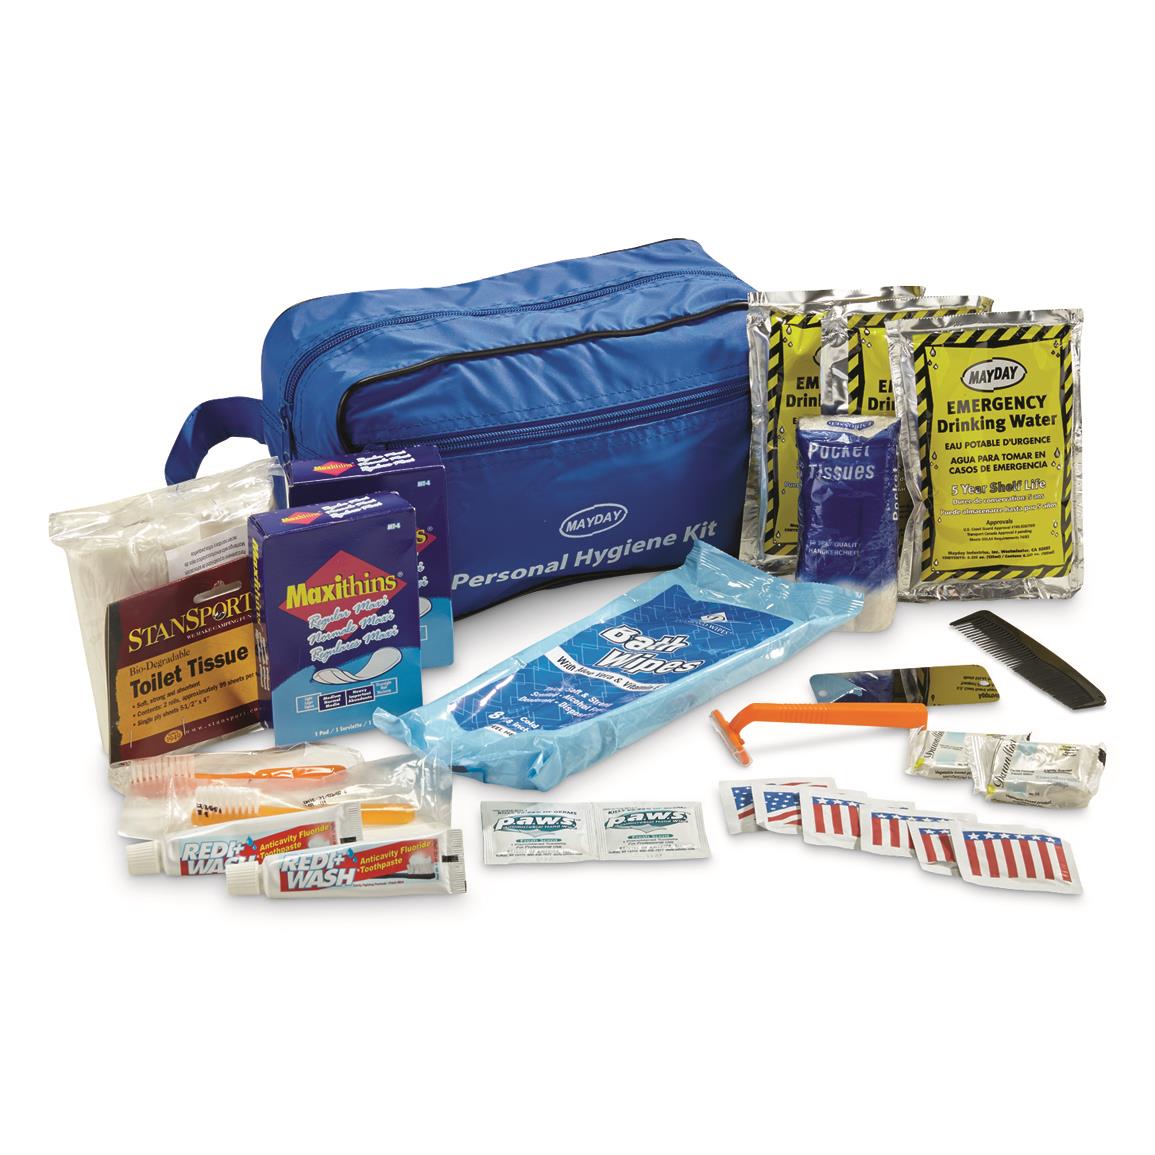 U.S. Government Surplus Hygiene Kit, New 703711, Military First Aid